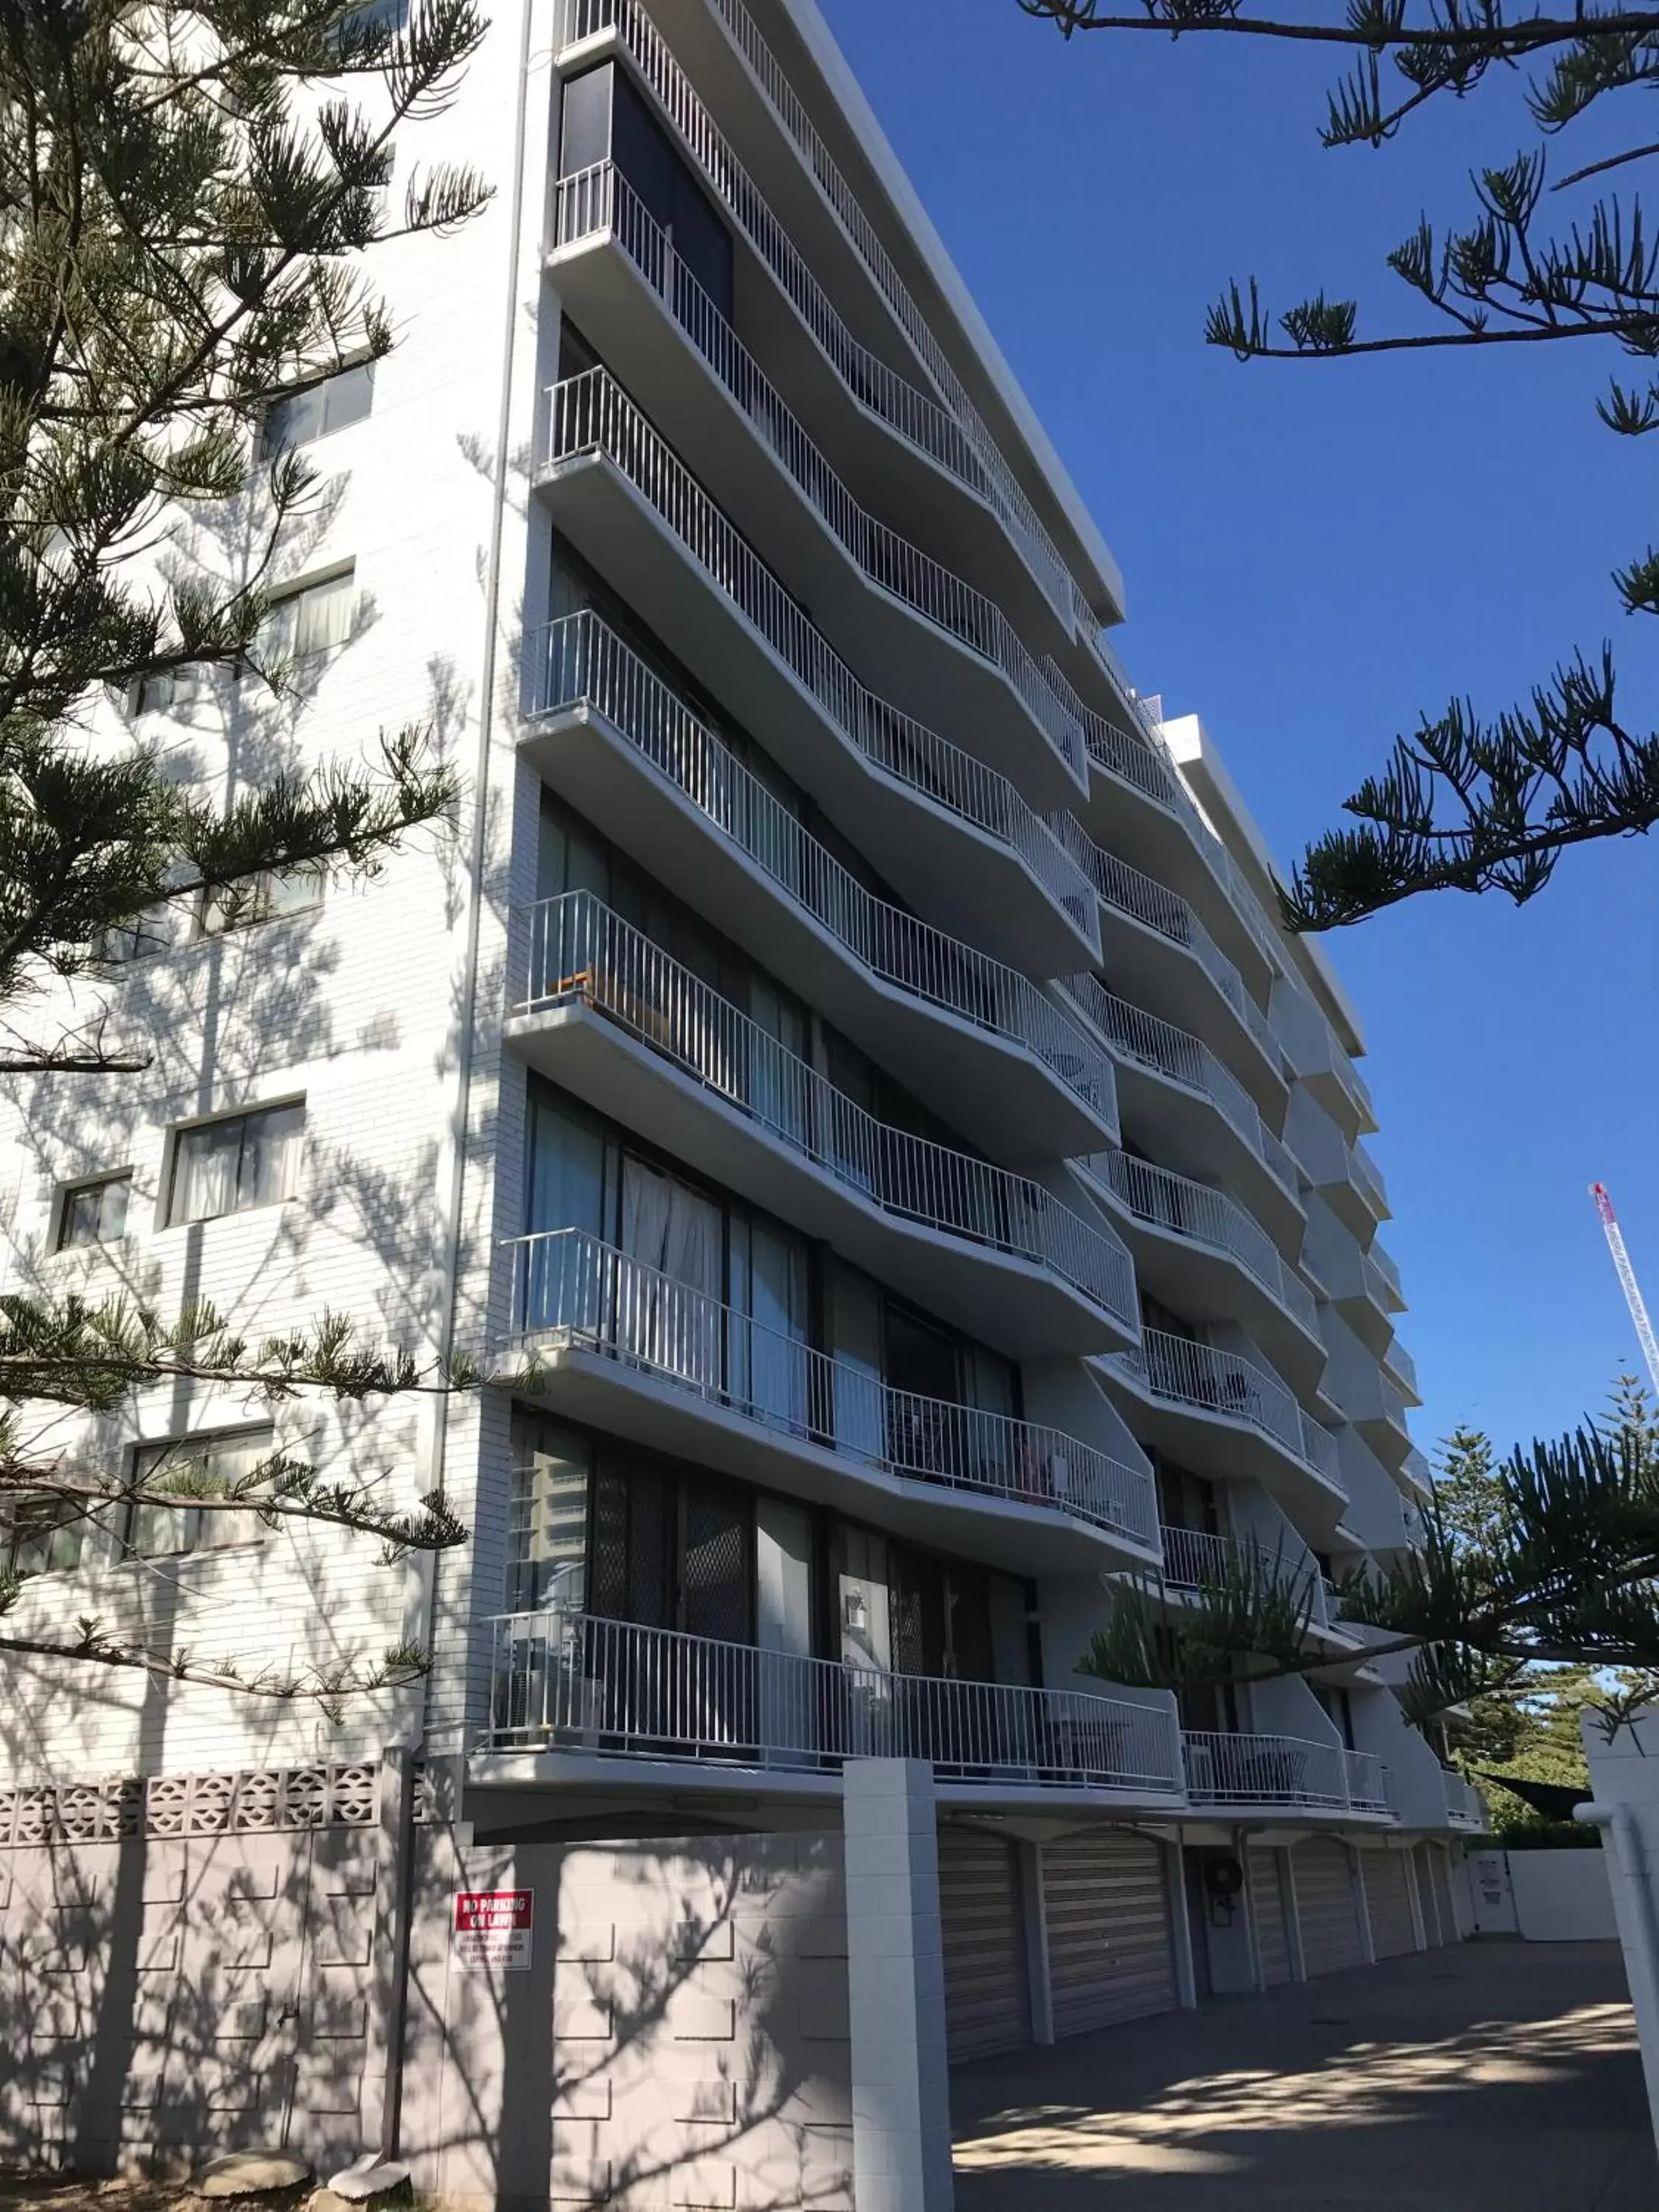 Property Building in Queensleigh Holiday Apartments